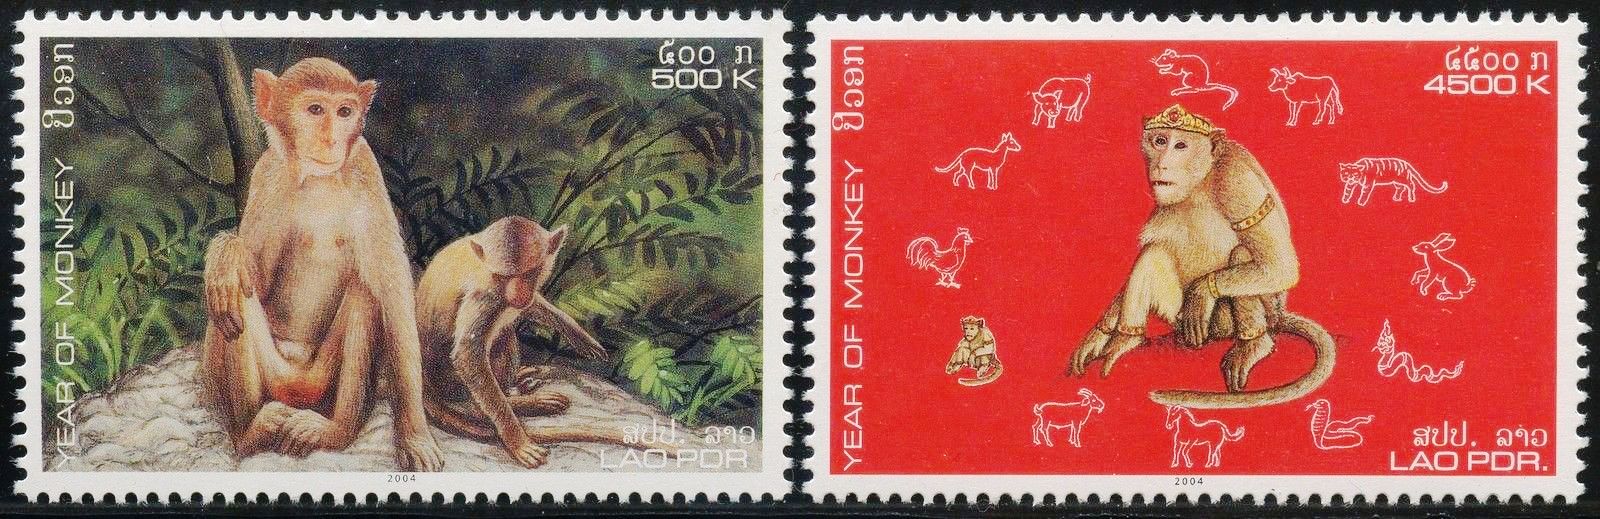 Laos 2004 Fdc & Stamps Year Of Monkey MNH - Click Image to Close